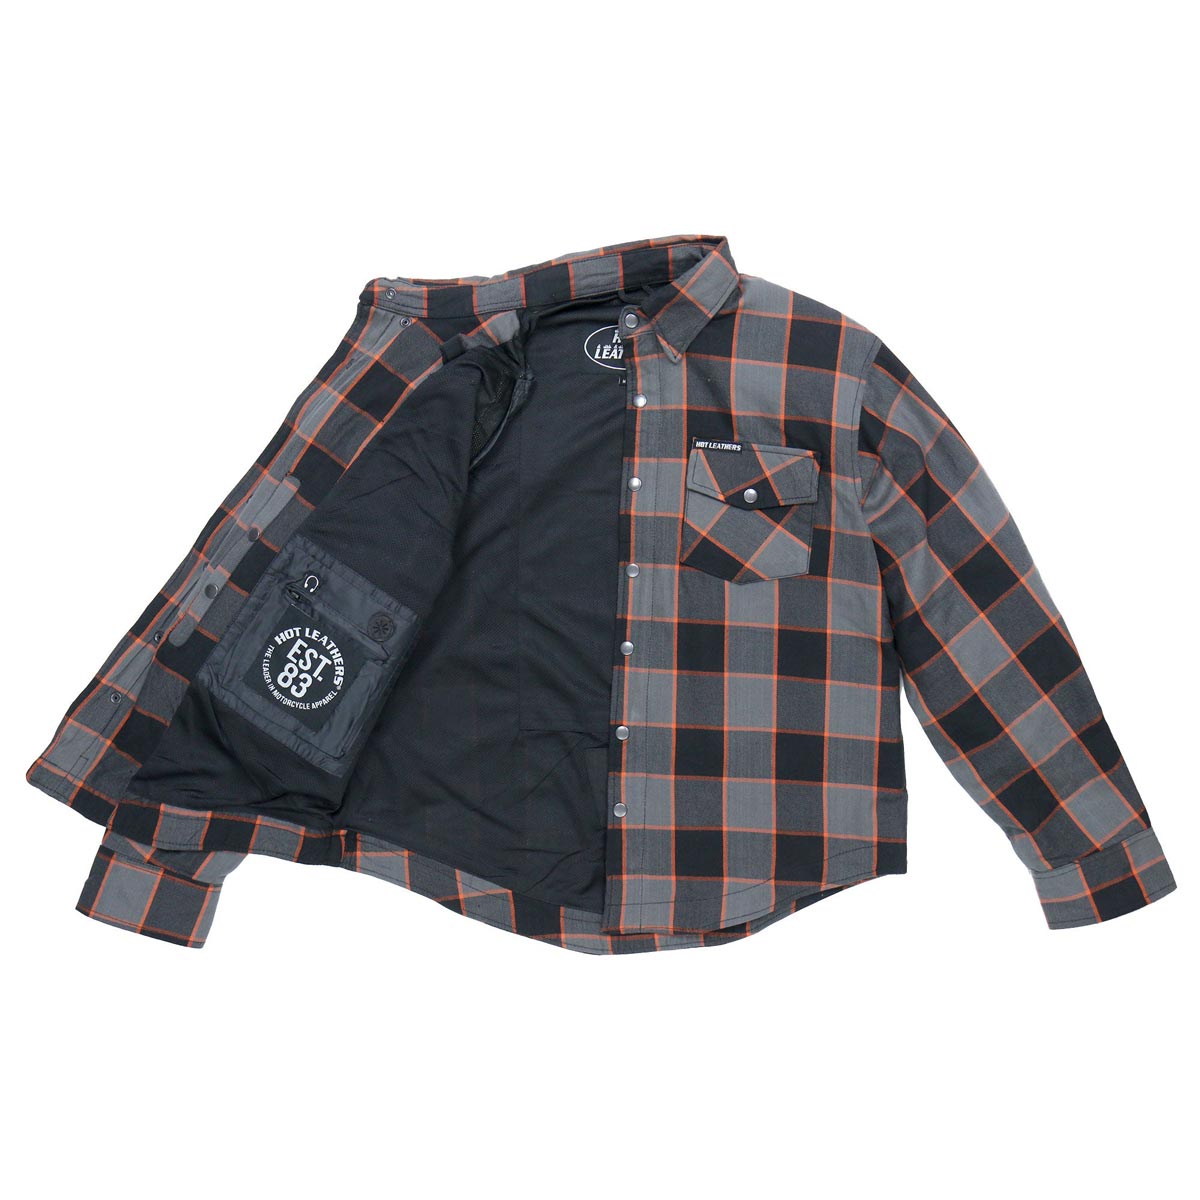 Hot Leathers JKM3010 Men's Black/Grey/Orange Armored Flannel Motorcycle Shirt-Jacket w/ CE Armor Protection